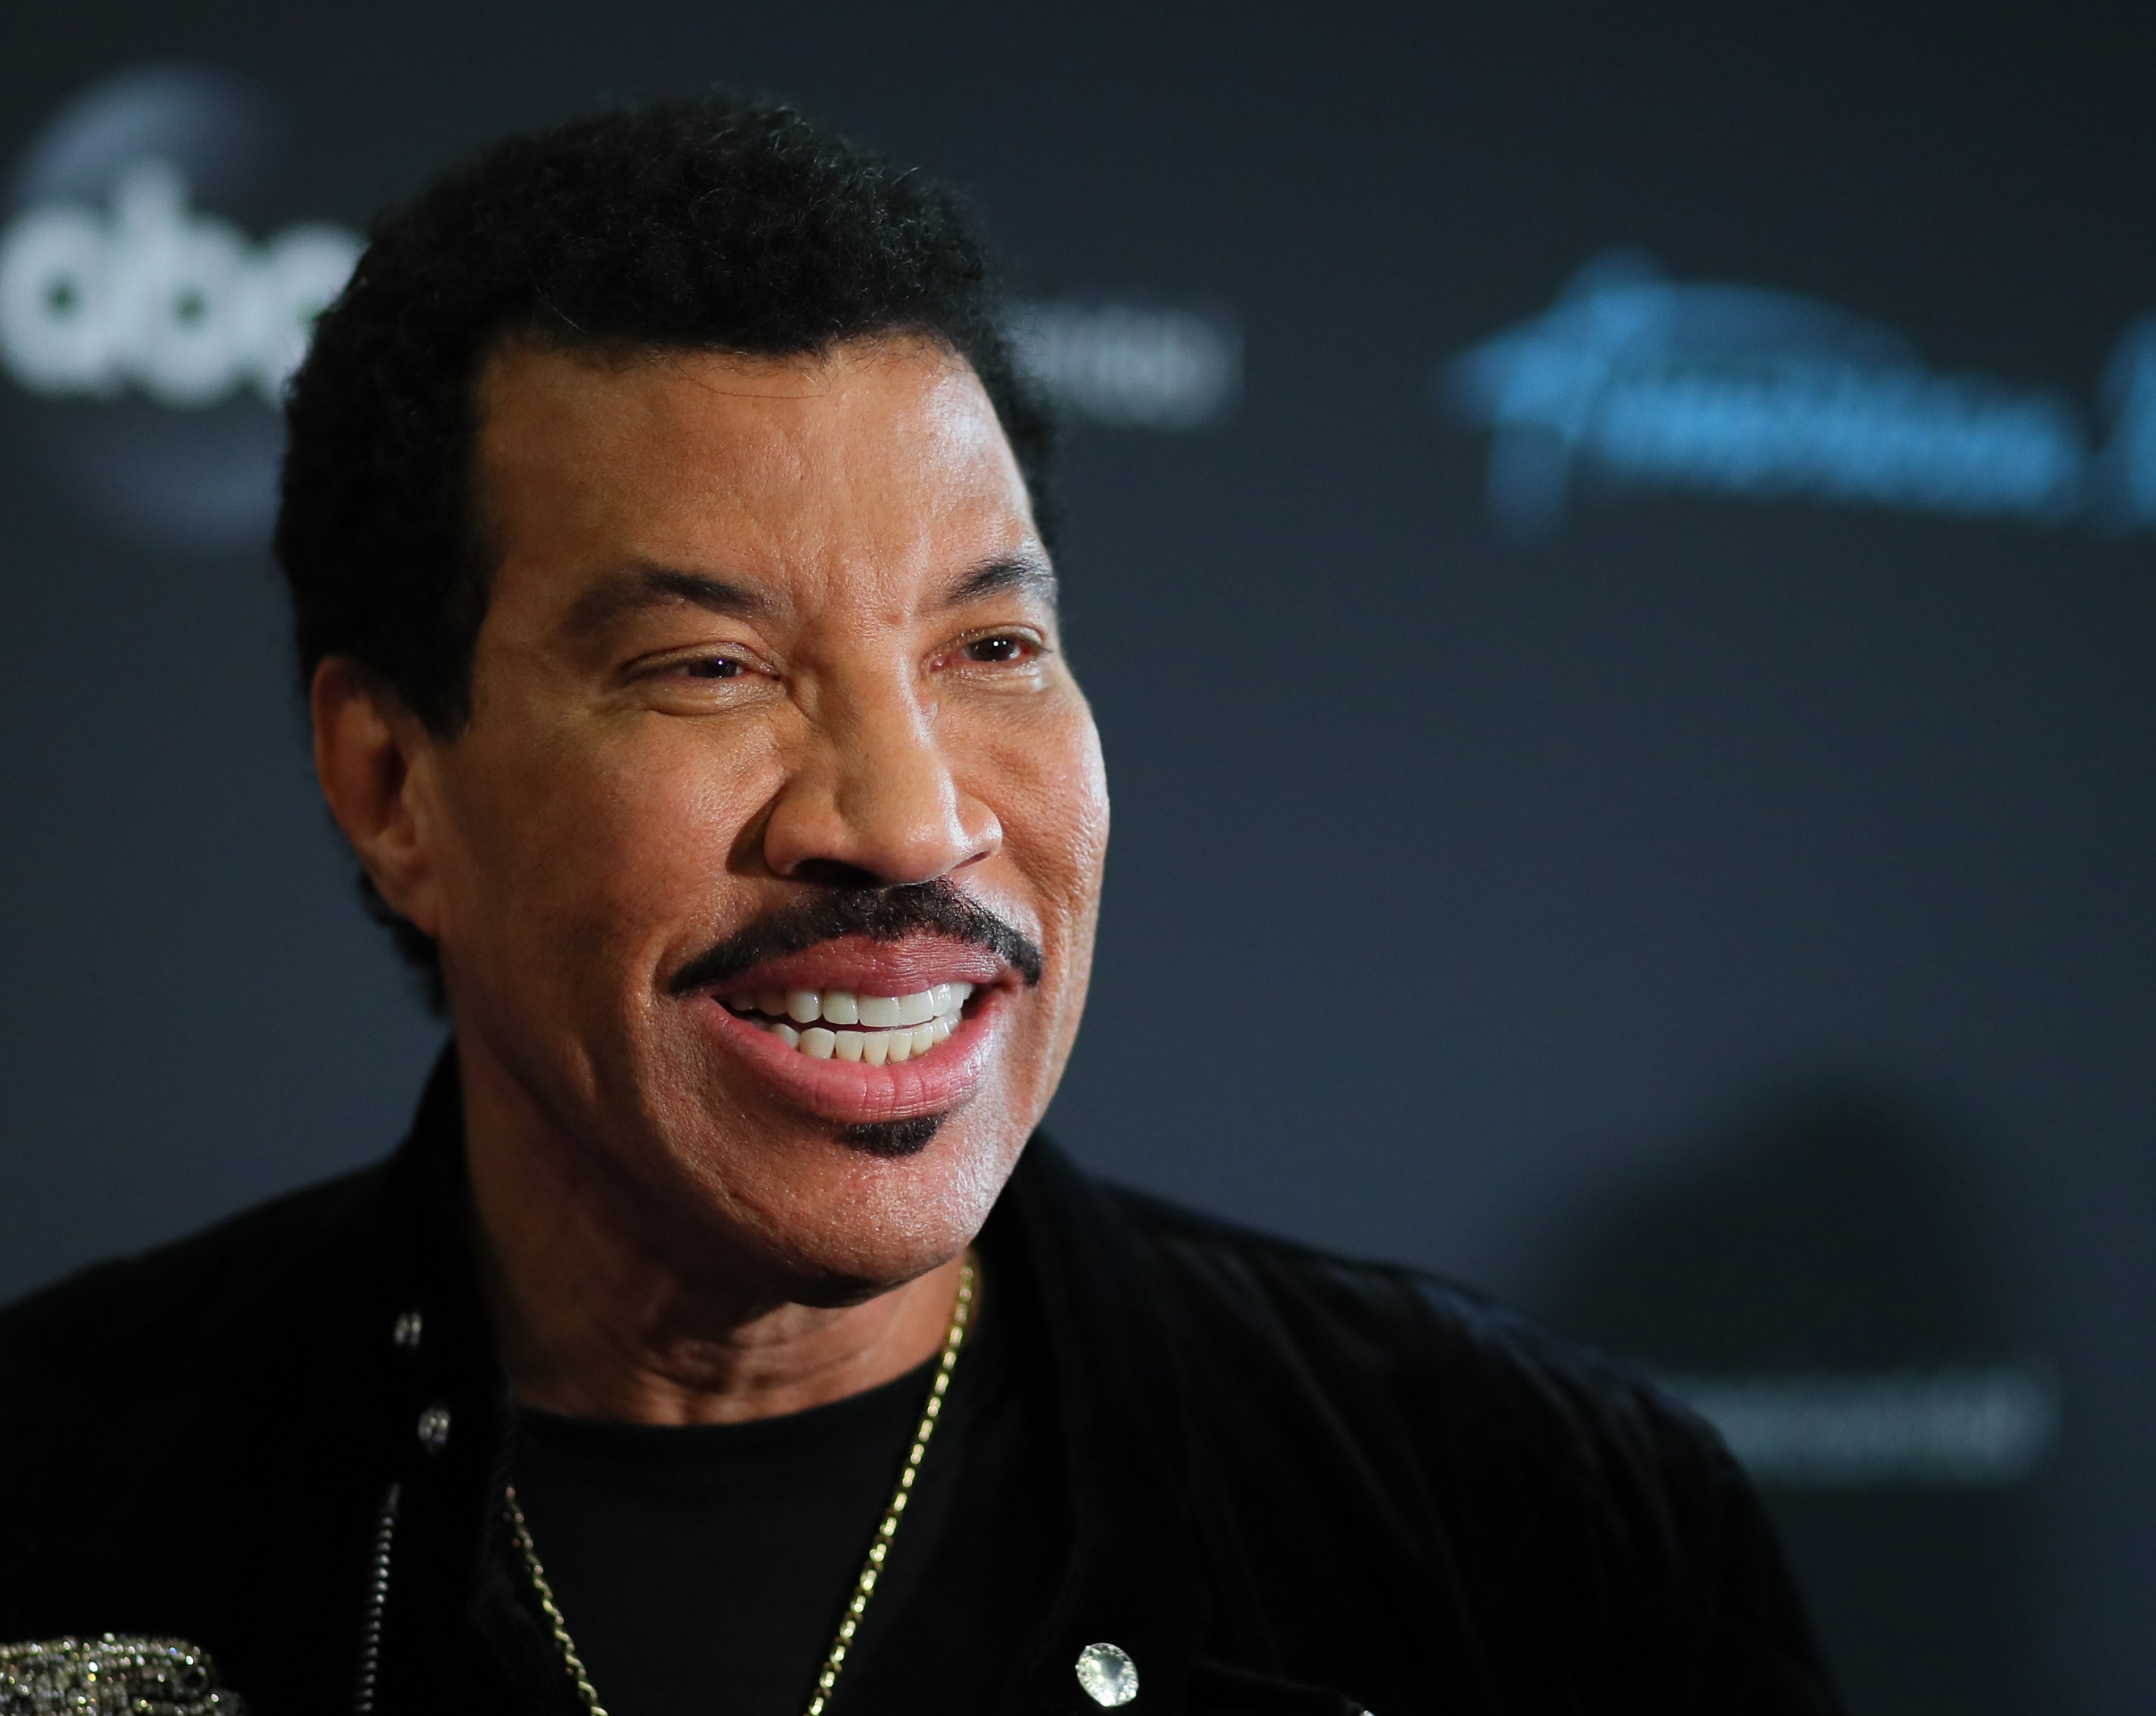 Lionel Richie attends the taping of ABC's 'American Idol' on April 21, 2018 | Photo: Getty Images